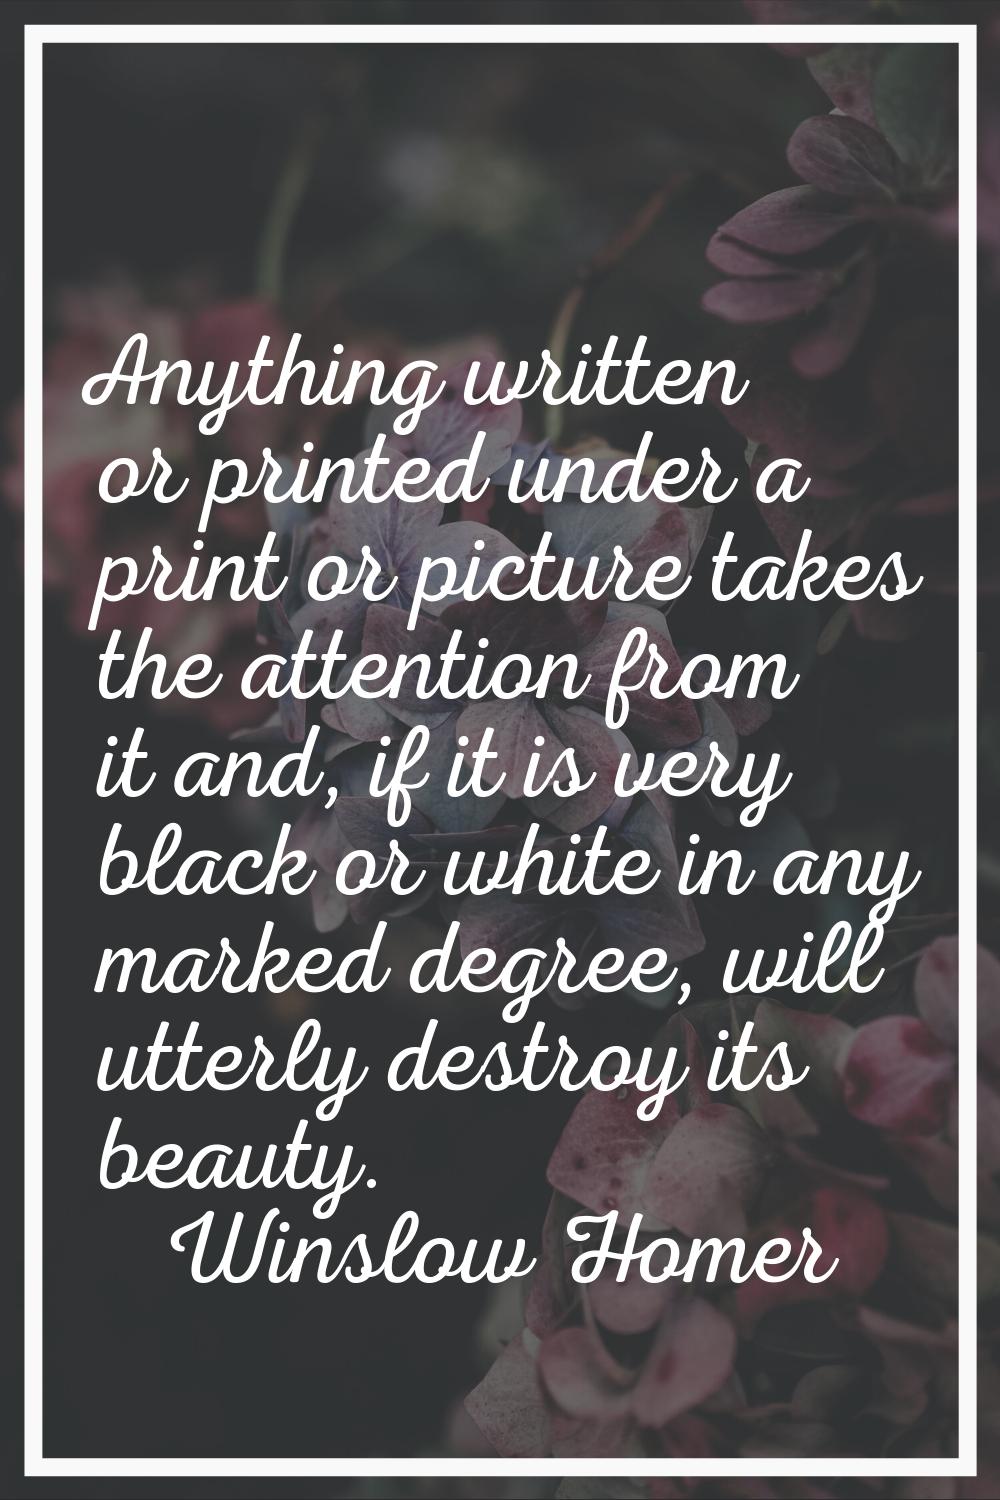 Anything written or printed under a print or picture takes the attention from it and, if it is very